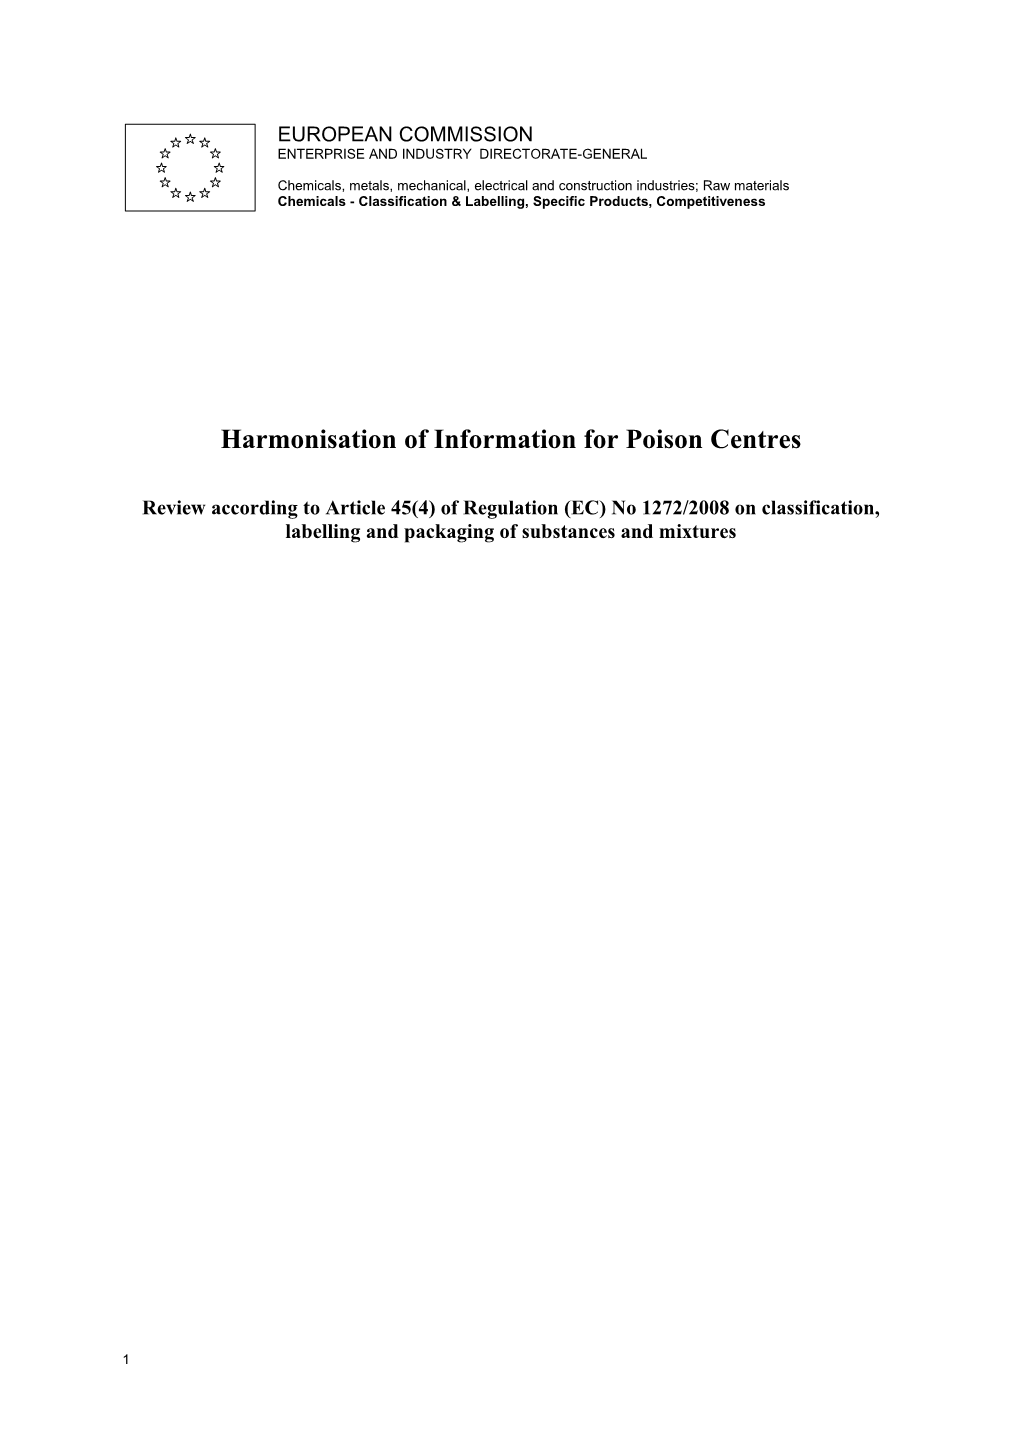 Harmonisation of Information for Poison Centres